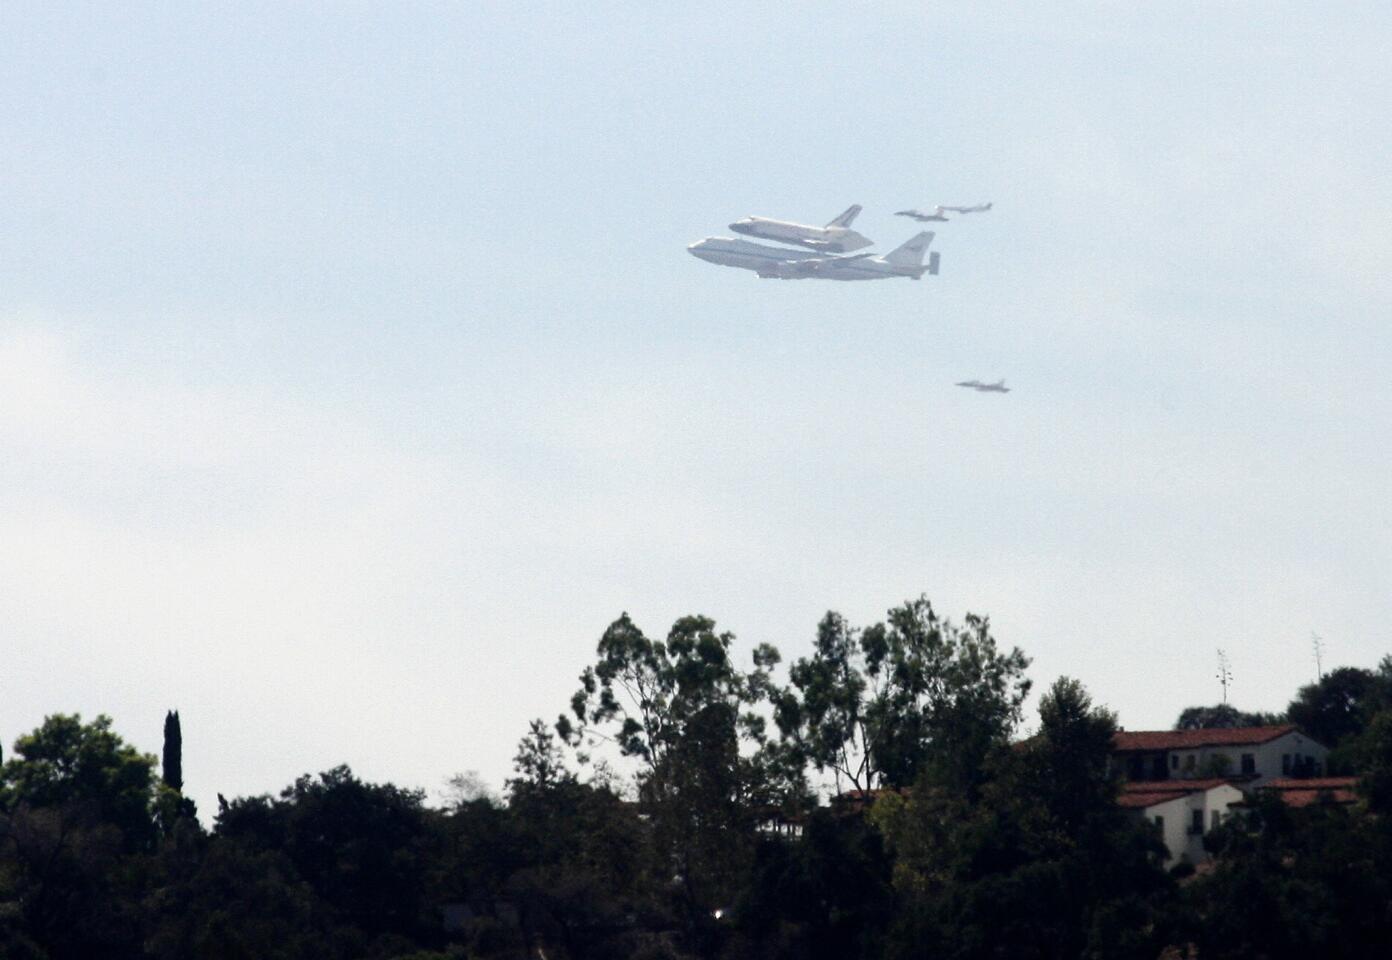 Photo Gallery: Space Shuttle Endeavor flyover at JPL